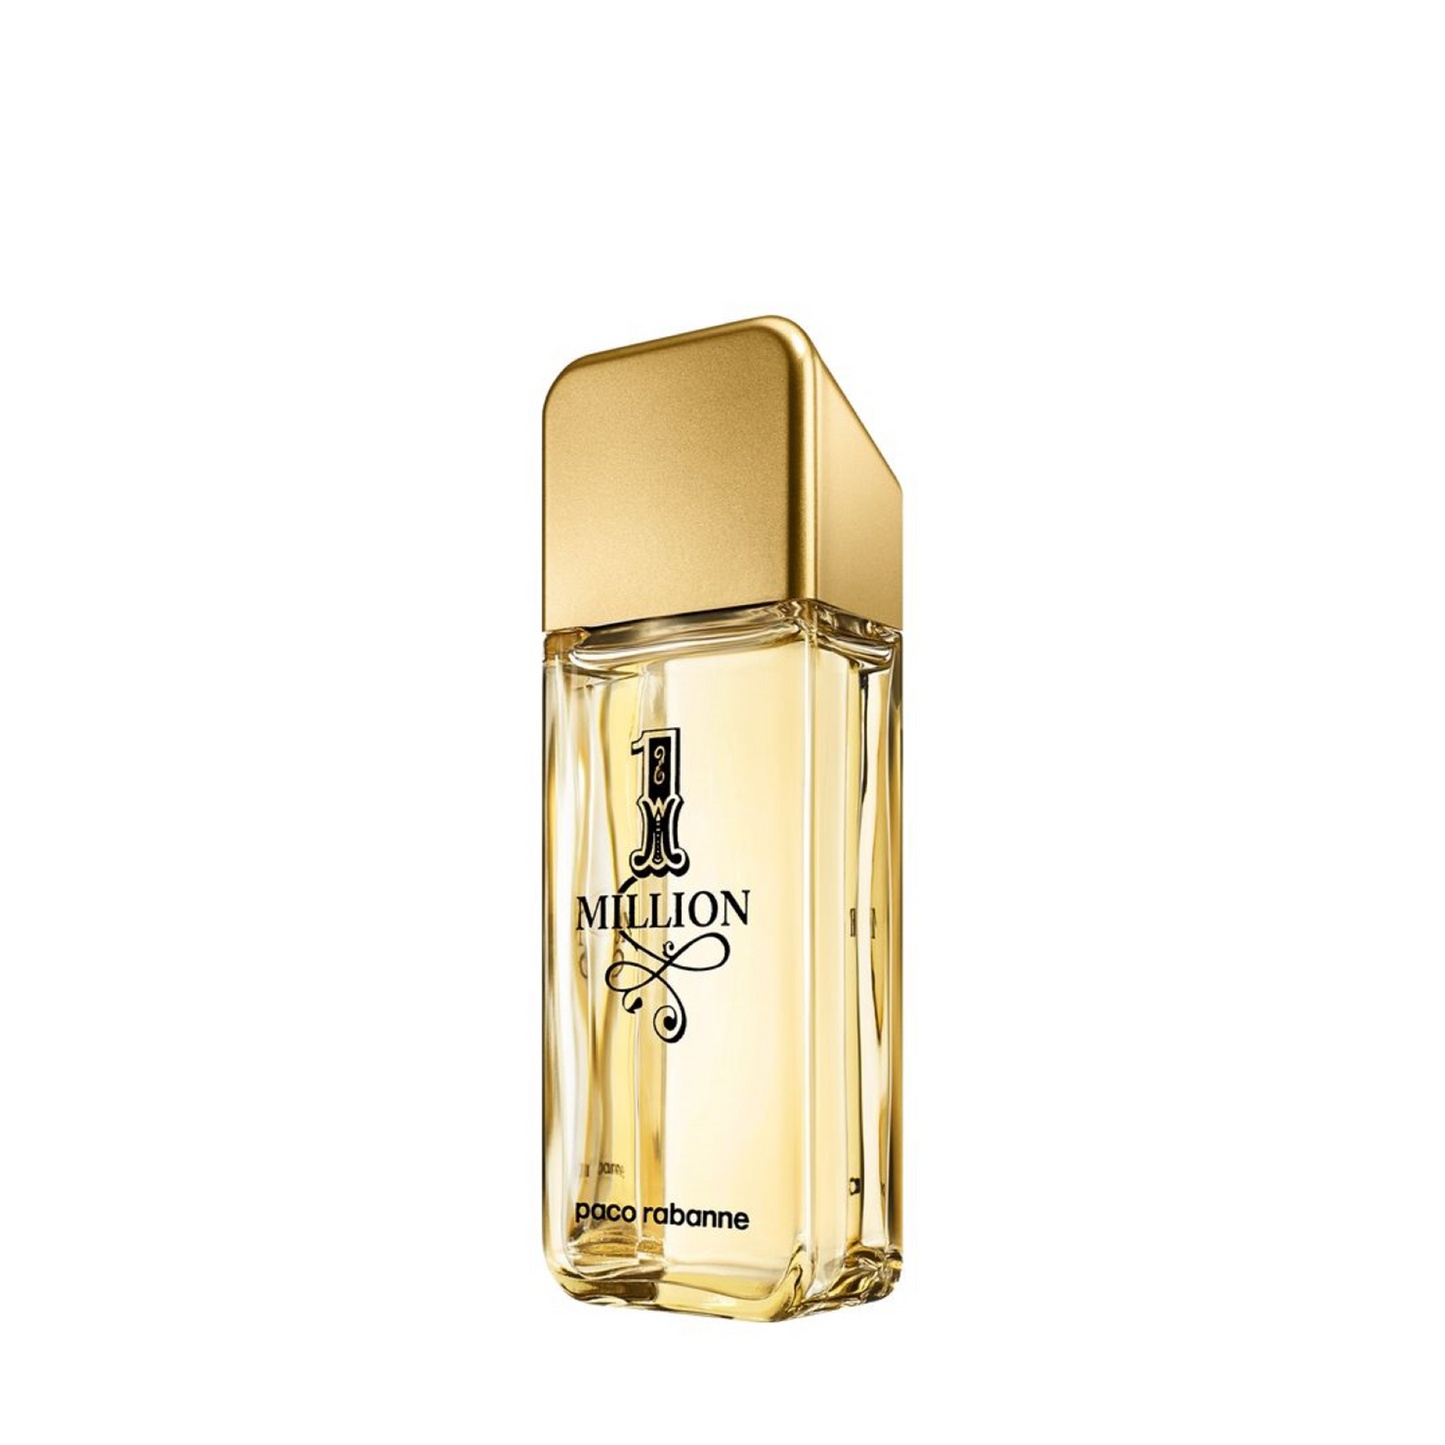 PACO RABANNE 1 MILLION AFTER SHAVE LOTION